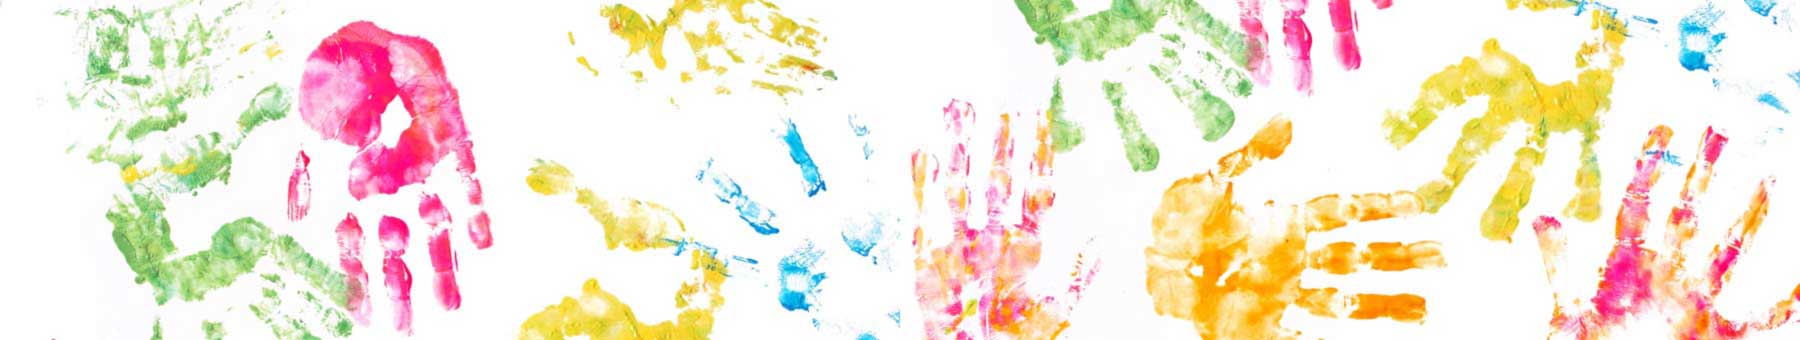 Children's hand prints in bright colors